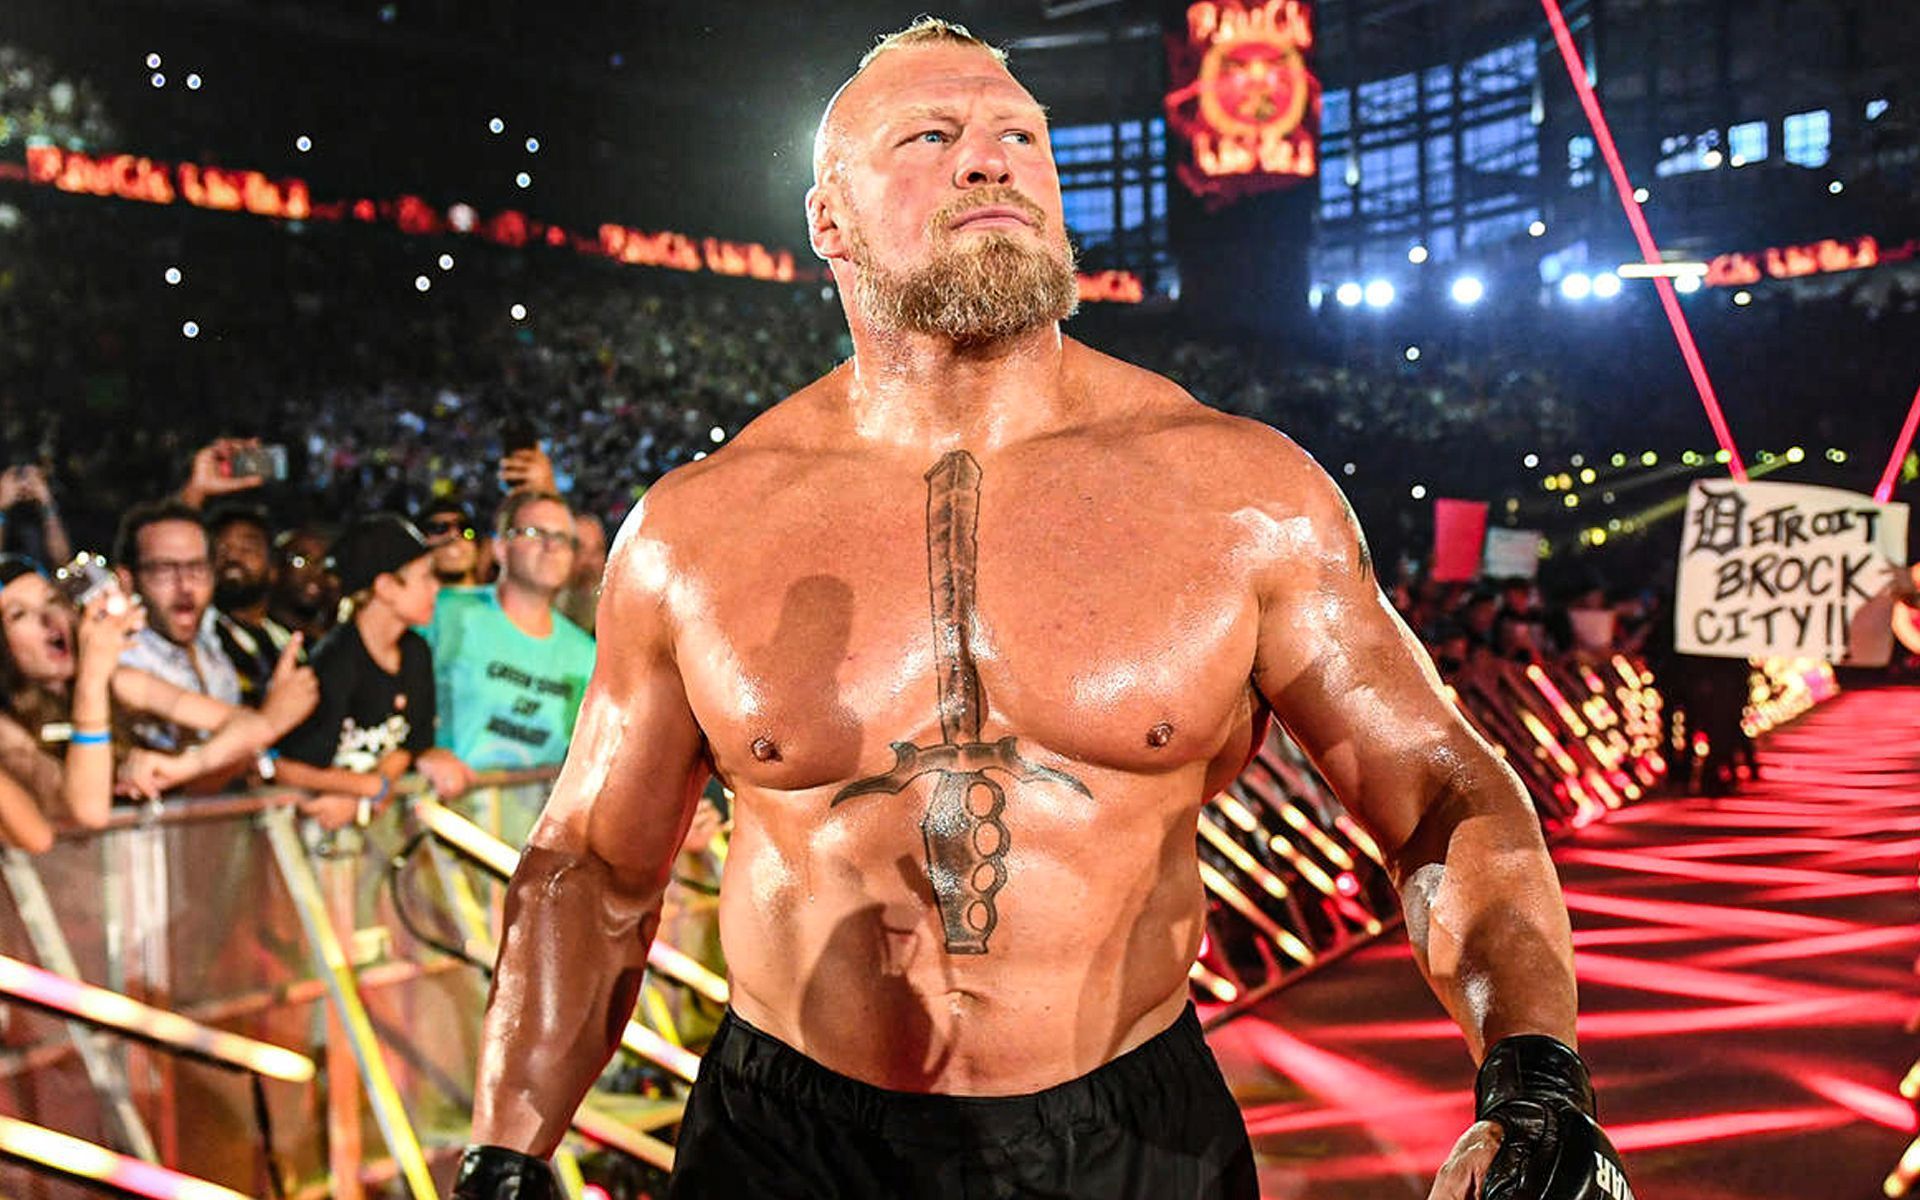 Brock Lesnar is reportedly suffering from an injury